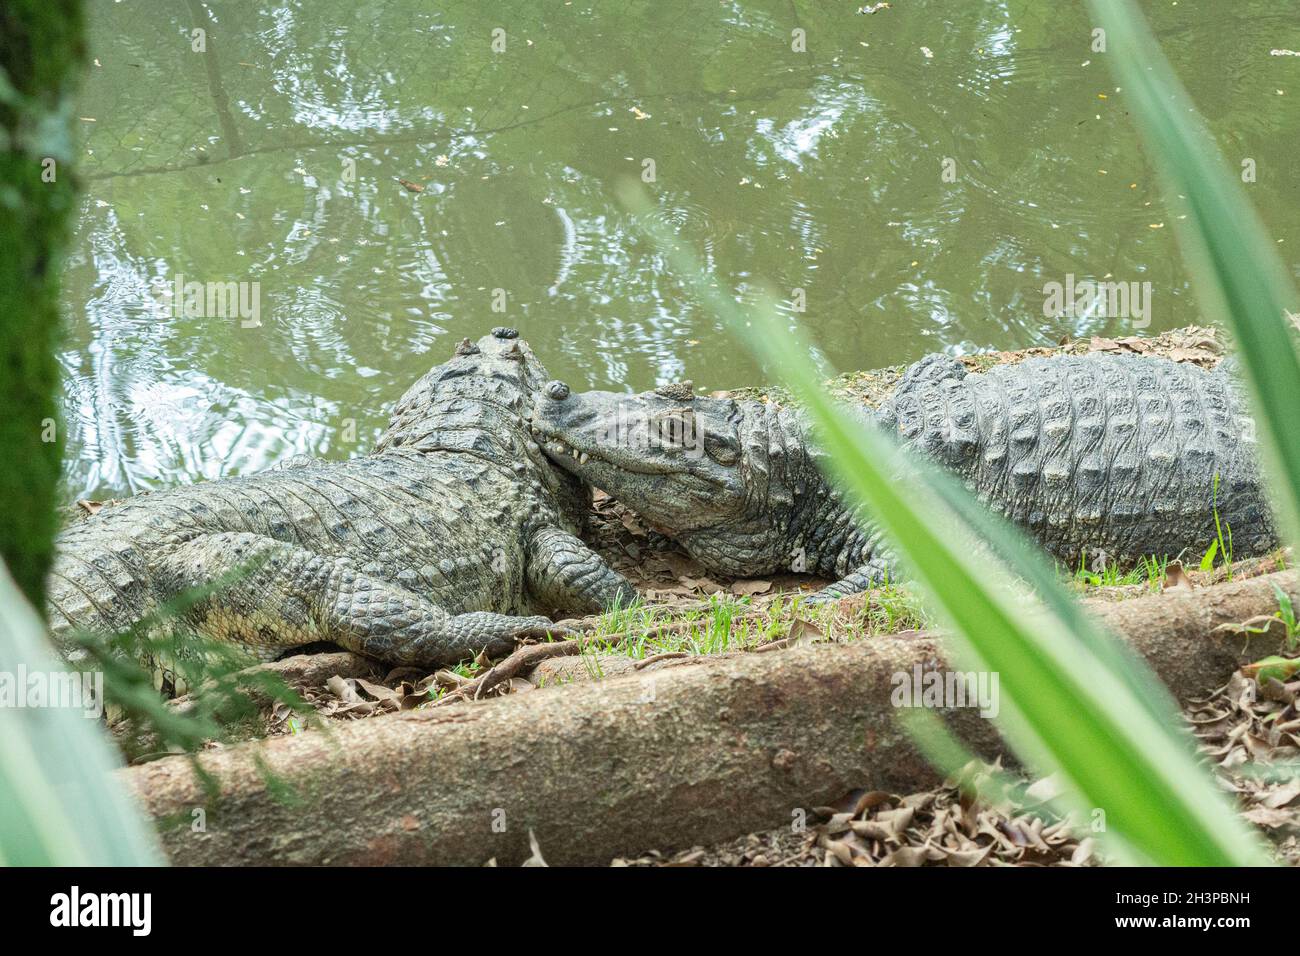 Two alligators with yellow bramble resting and sunbathing on the shores of a lake. The alligator is a natural predator at the top of the food chain. Stock Photo